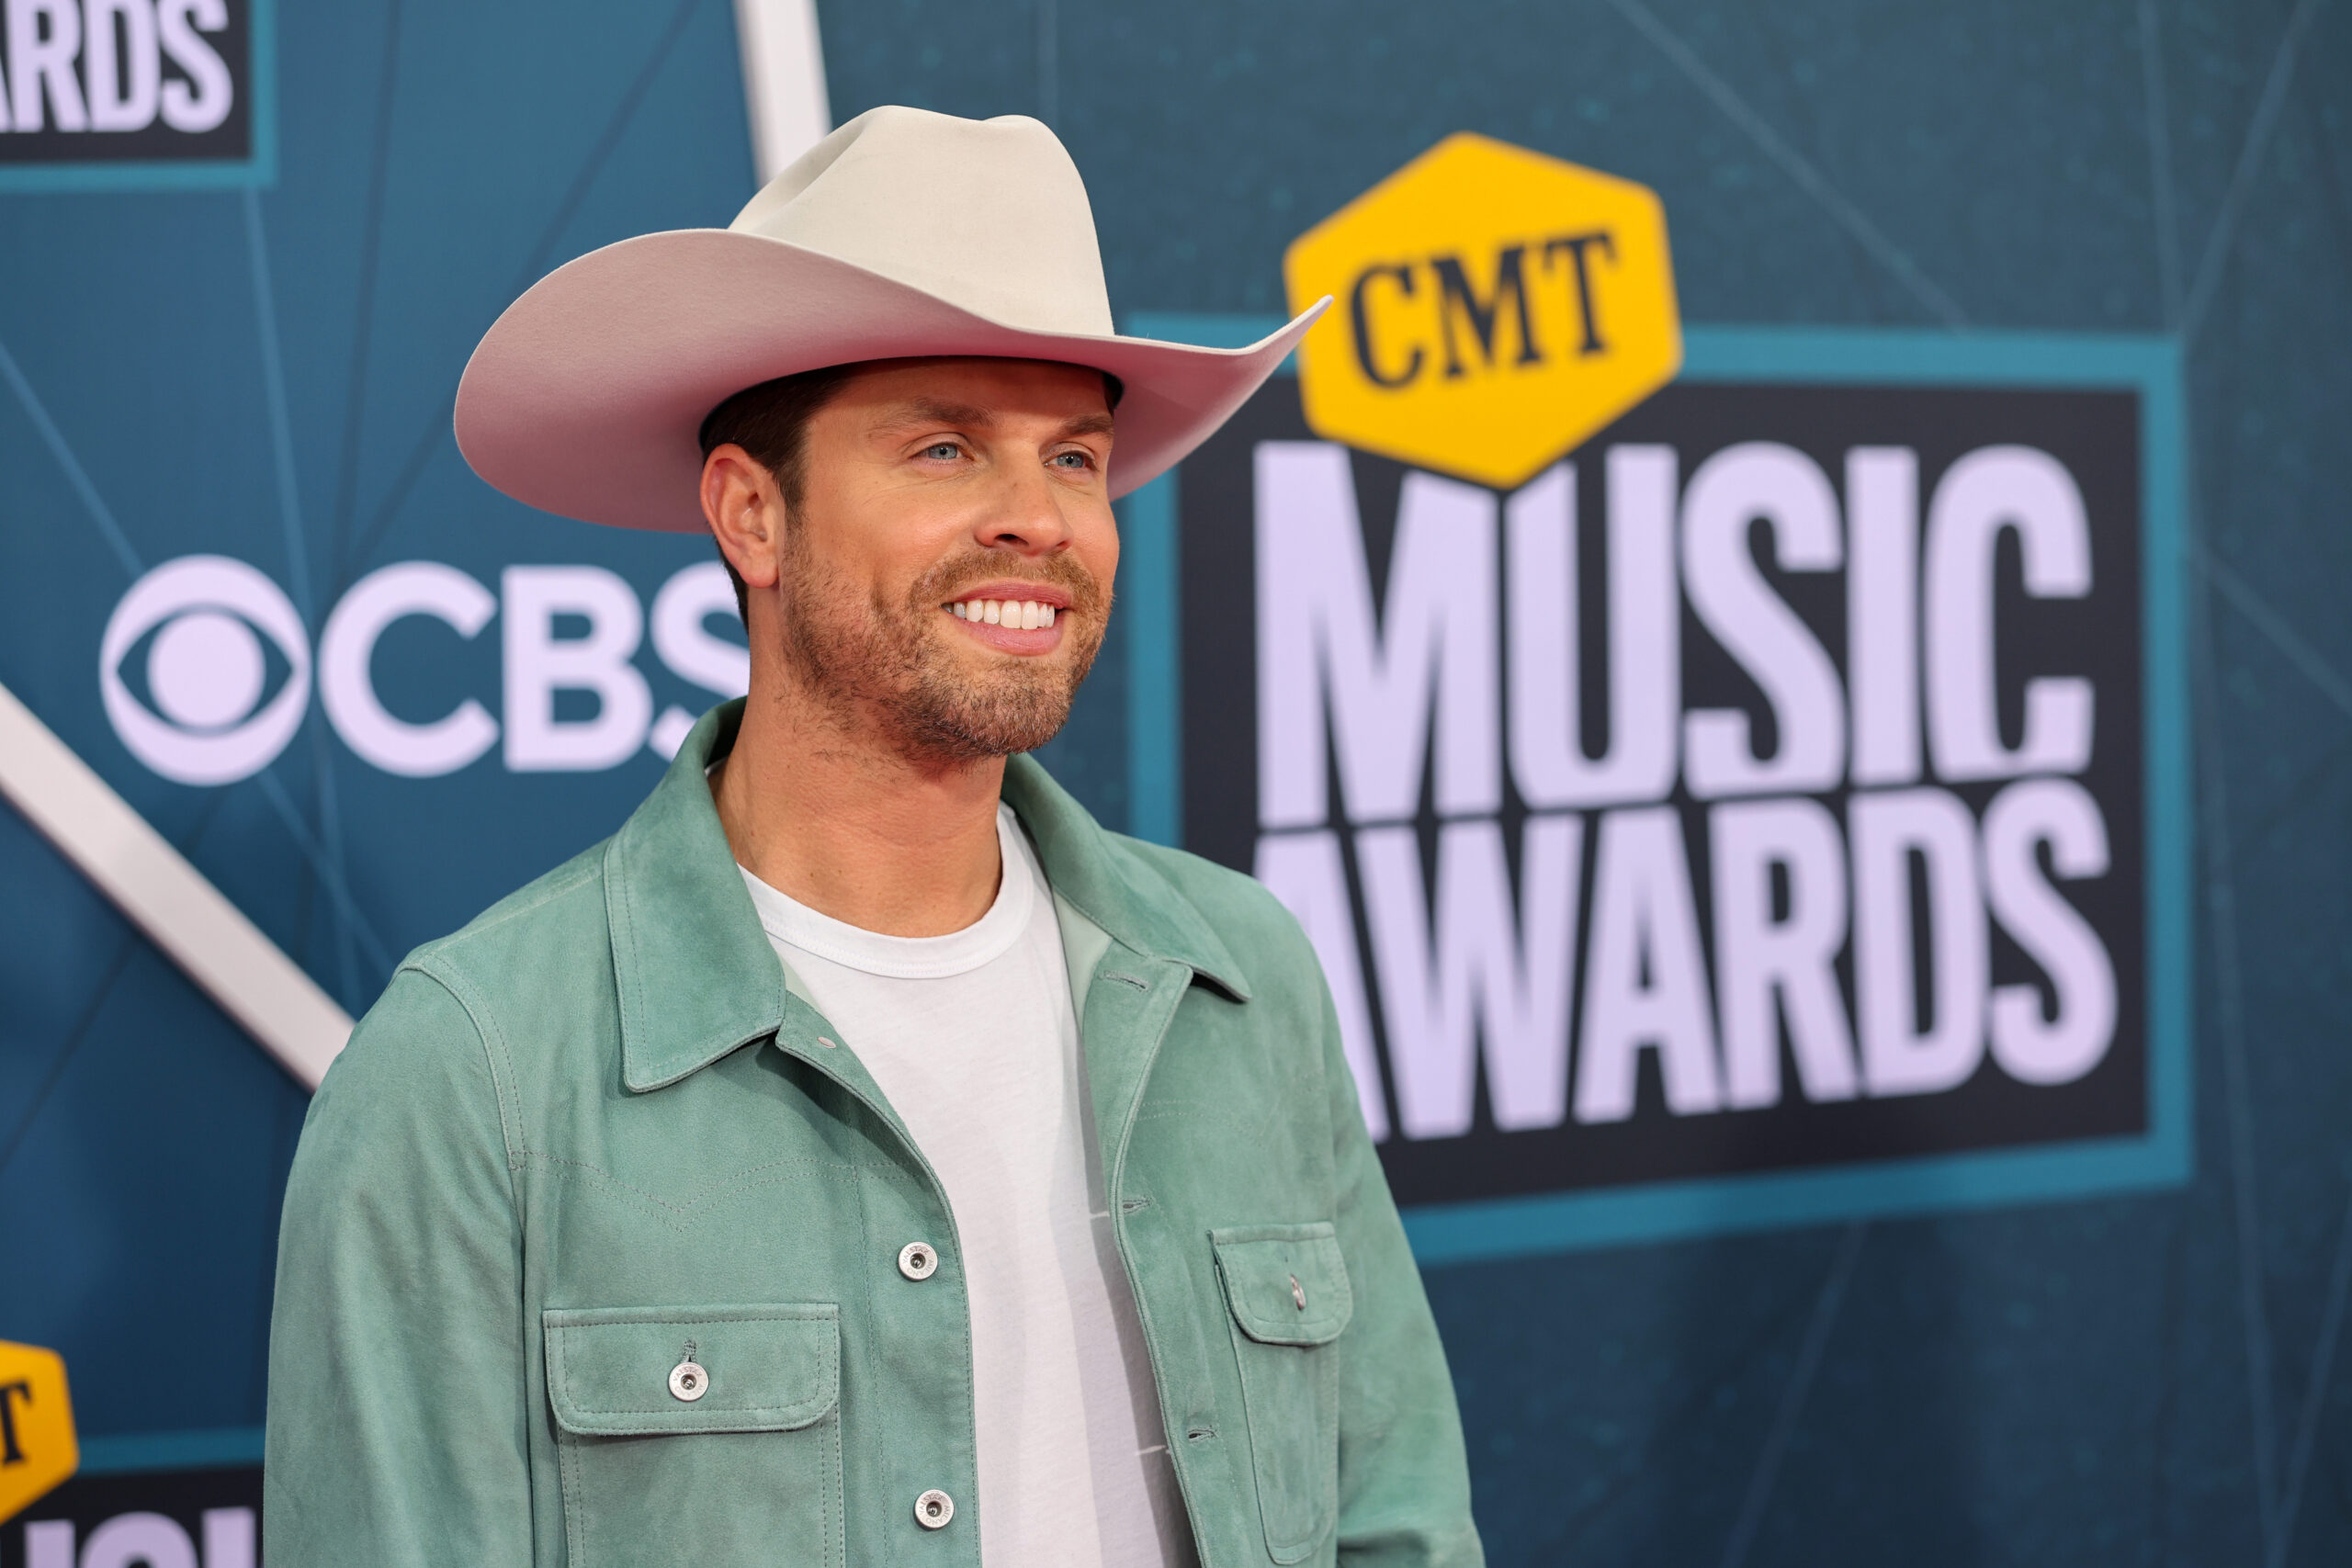 Dustin Lynch Makes History with “Thinking ‘Bout You” with MacKenzie Porter, Says This Song Has Been “The Greatest Gift” (Exclusive)